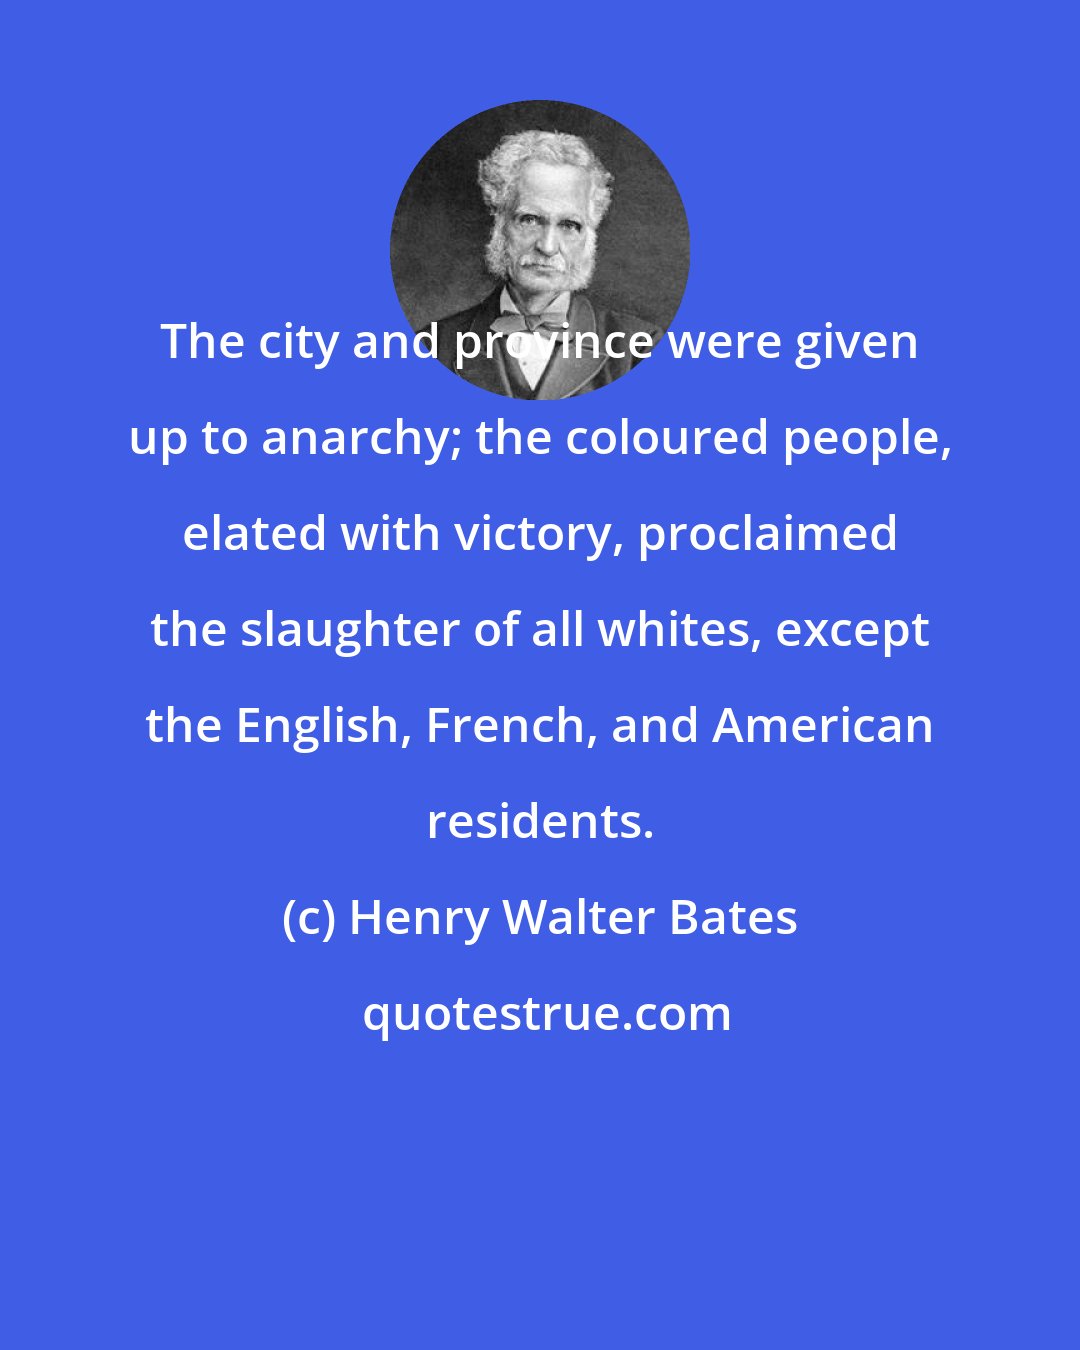 Henry Walter Bates: The city and province were given up to anarchy; the coloured people, elated with victory, proclaimed the slaughter of all whites, except the English, French, and American residents.